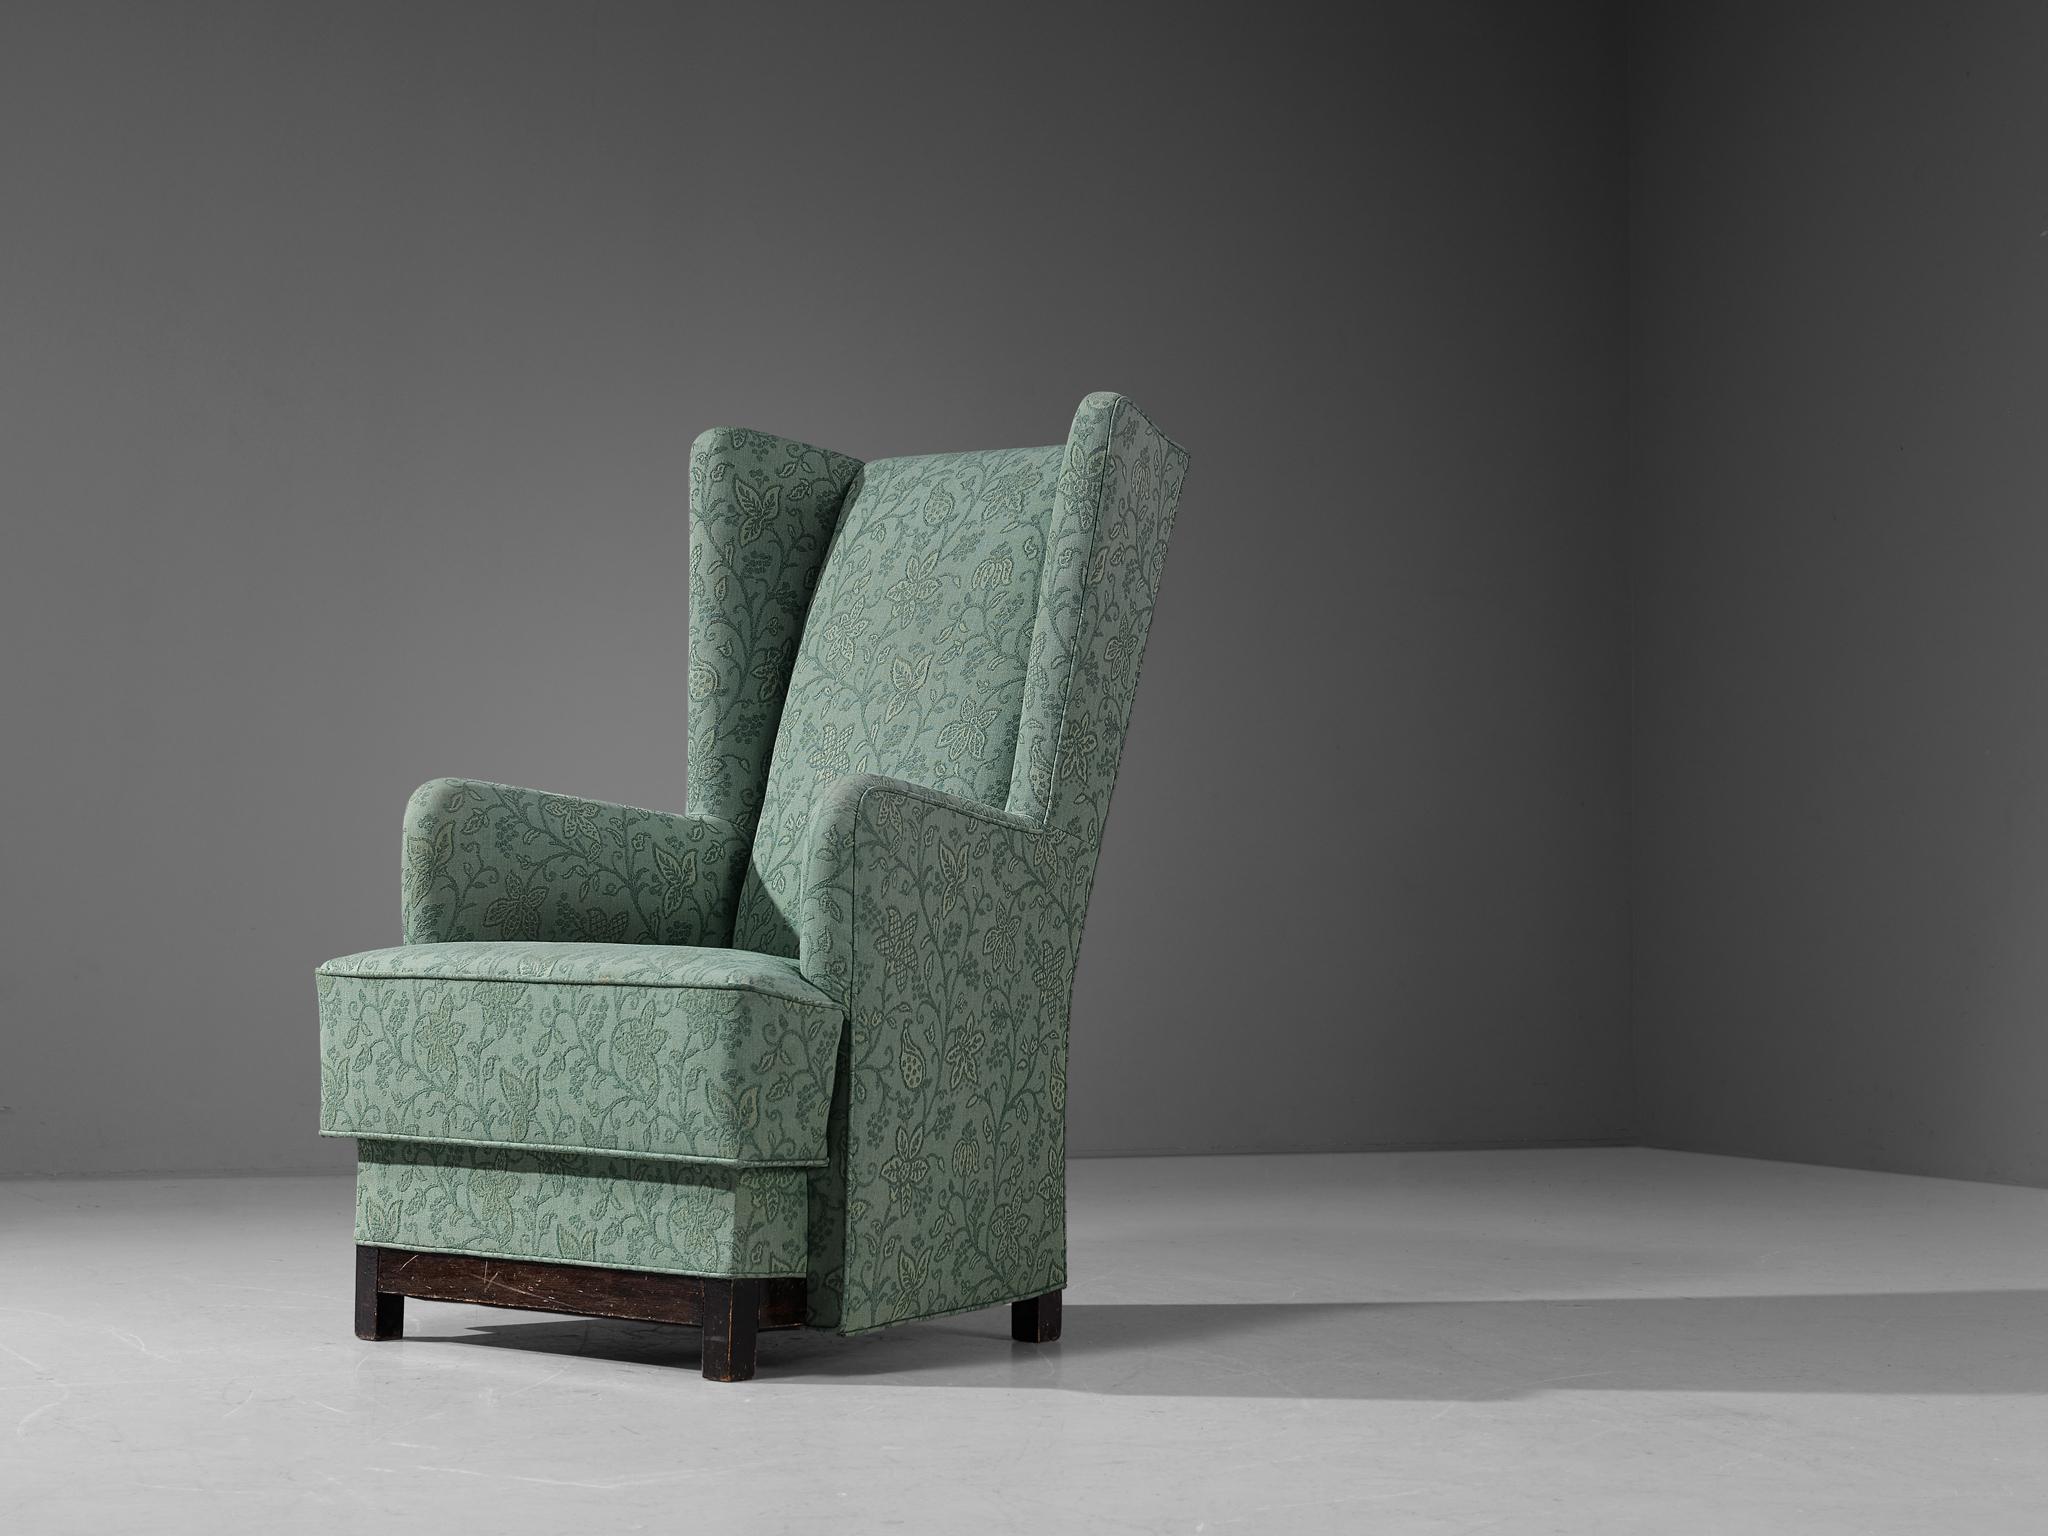 Attributed to Uno Åhrén and Björn Trägårdh for Svenskt Tenn, easy chair, fabric, stained wood, Sweden, 1930s.

This lounge chair of Swedish origin comes with a mint green upholstery adorned with floral motifs. The design is based on a solid